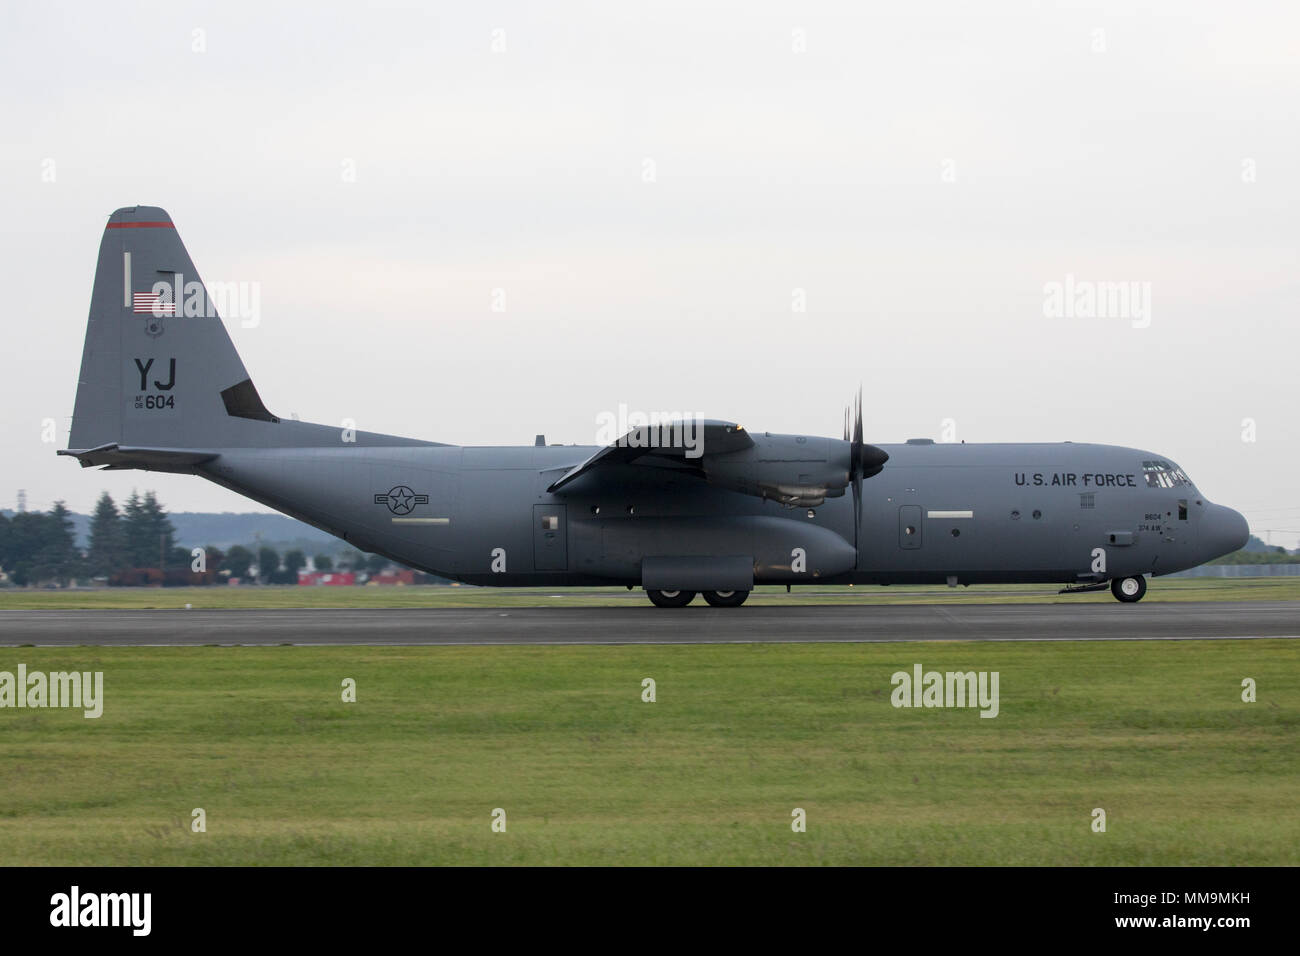 A C-130J Super Hercules assigned to the 36th Airlift Squadron lands at Yokota Air Base, Japan, Sept. 20, 2017. This is the fifth C-130J delivered to Yokota and the first from Ramstein Air Base. Crewmembers from the 36th Airlift Squadron flew halfway around the world to deliver an aircraft here. Yokota serves as the primary Western Pacific airlift hub for U.S. Air Force peacetime and contingency operations. Missions include tactical airland, airdrop, aeromedical evacuation, special operations and distinguished visitor airlift. (U.S. Air Force photo by Yasuo Osakabe) Stock Photo